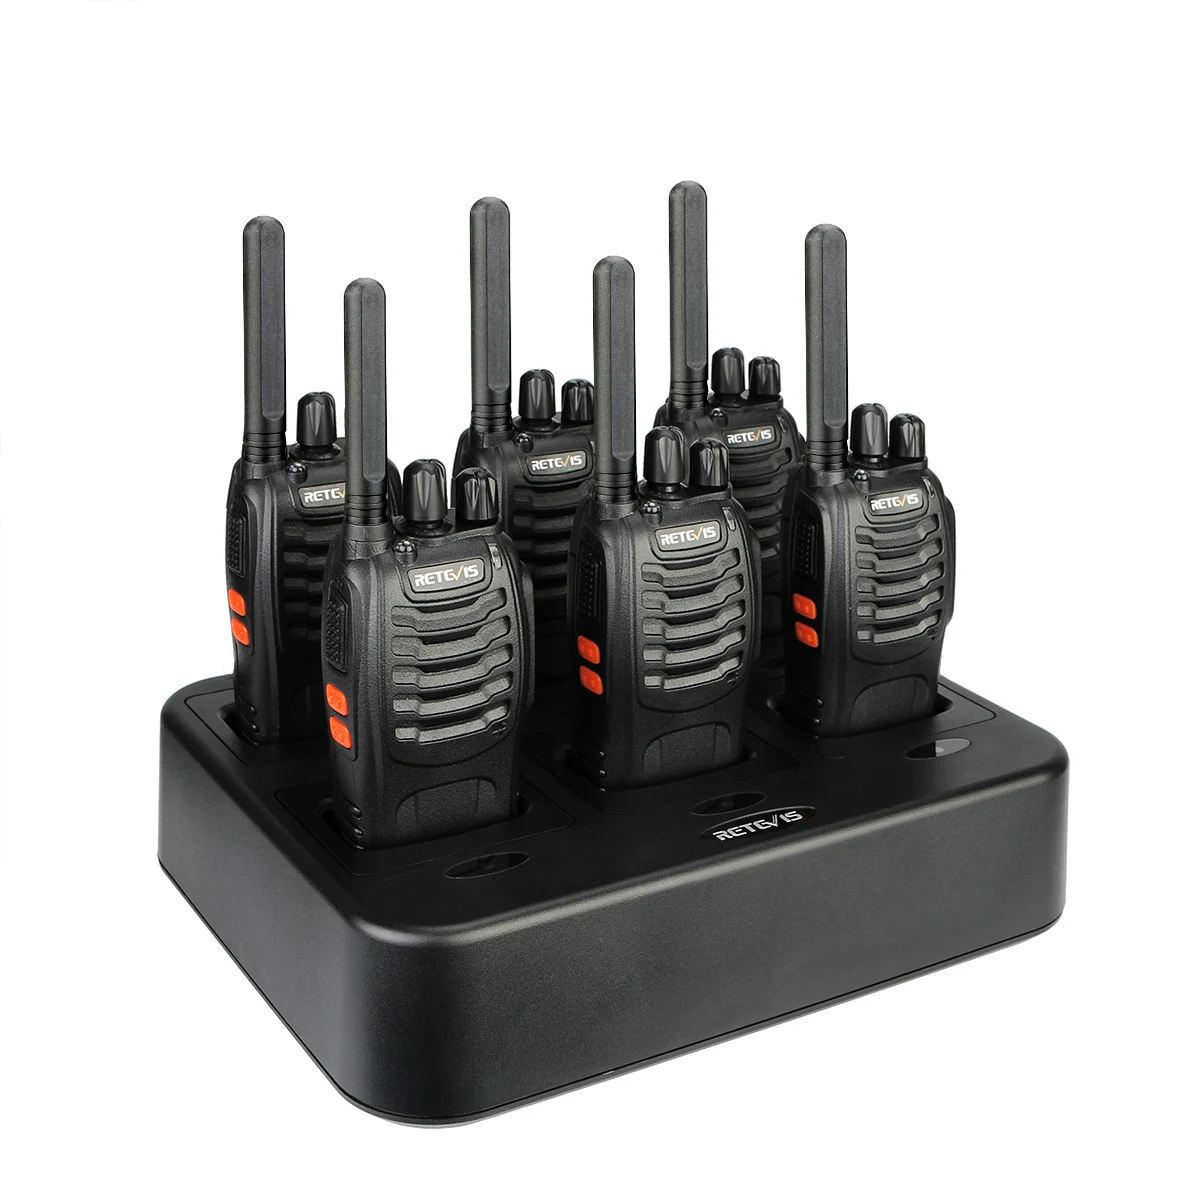 

6Pack Retevis H777 Walkie Talkie 5W CTCSS/DCS UHF400-470MHz 16CH FM Two Way Radio with six way Rapid Charger